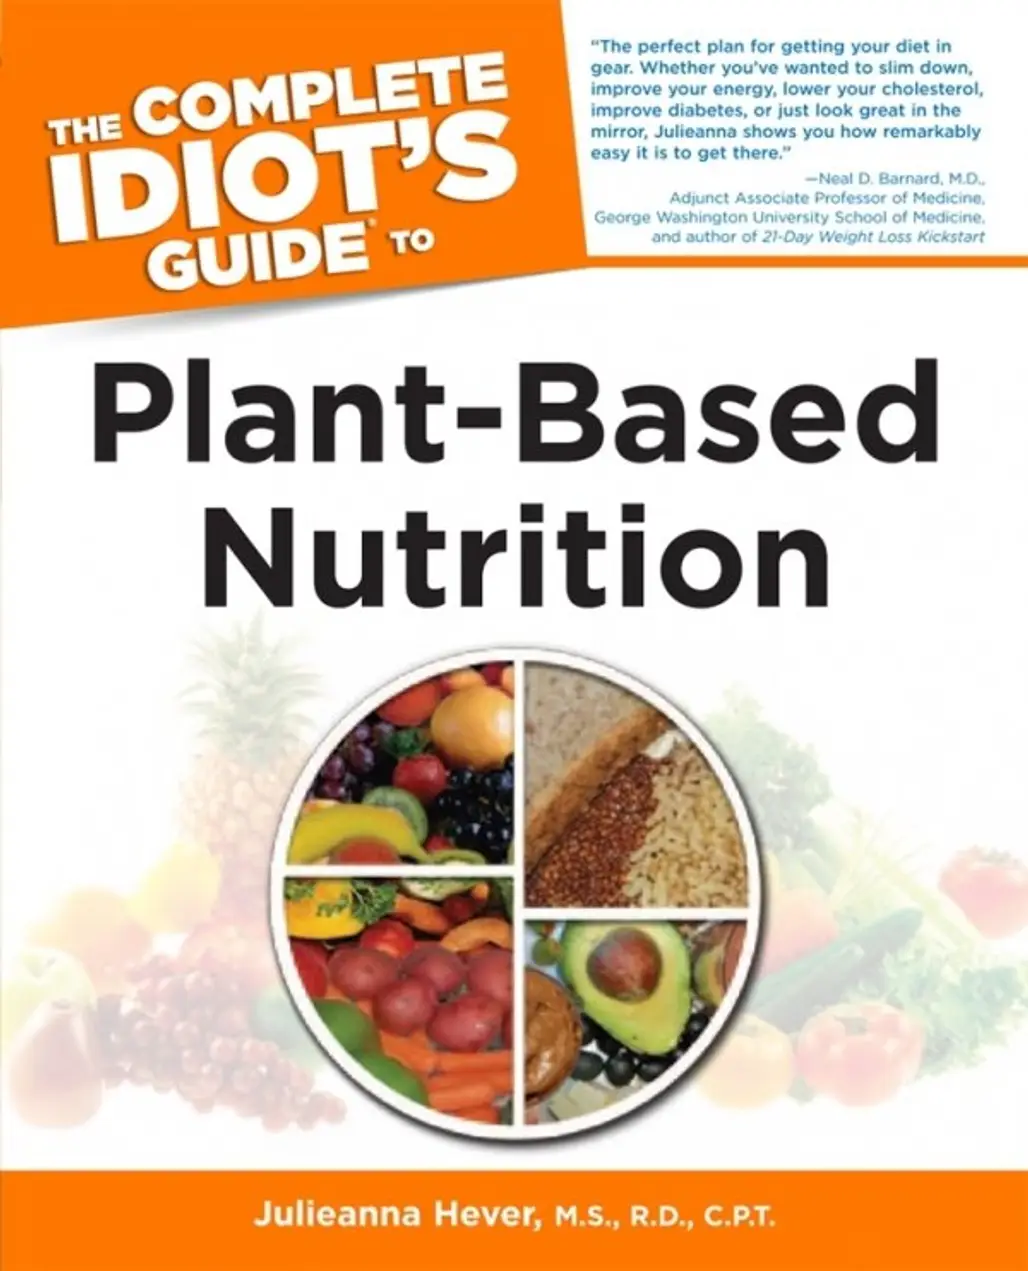 The Complete Idiot’s Guide to Plant Based Nutrition